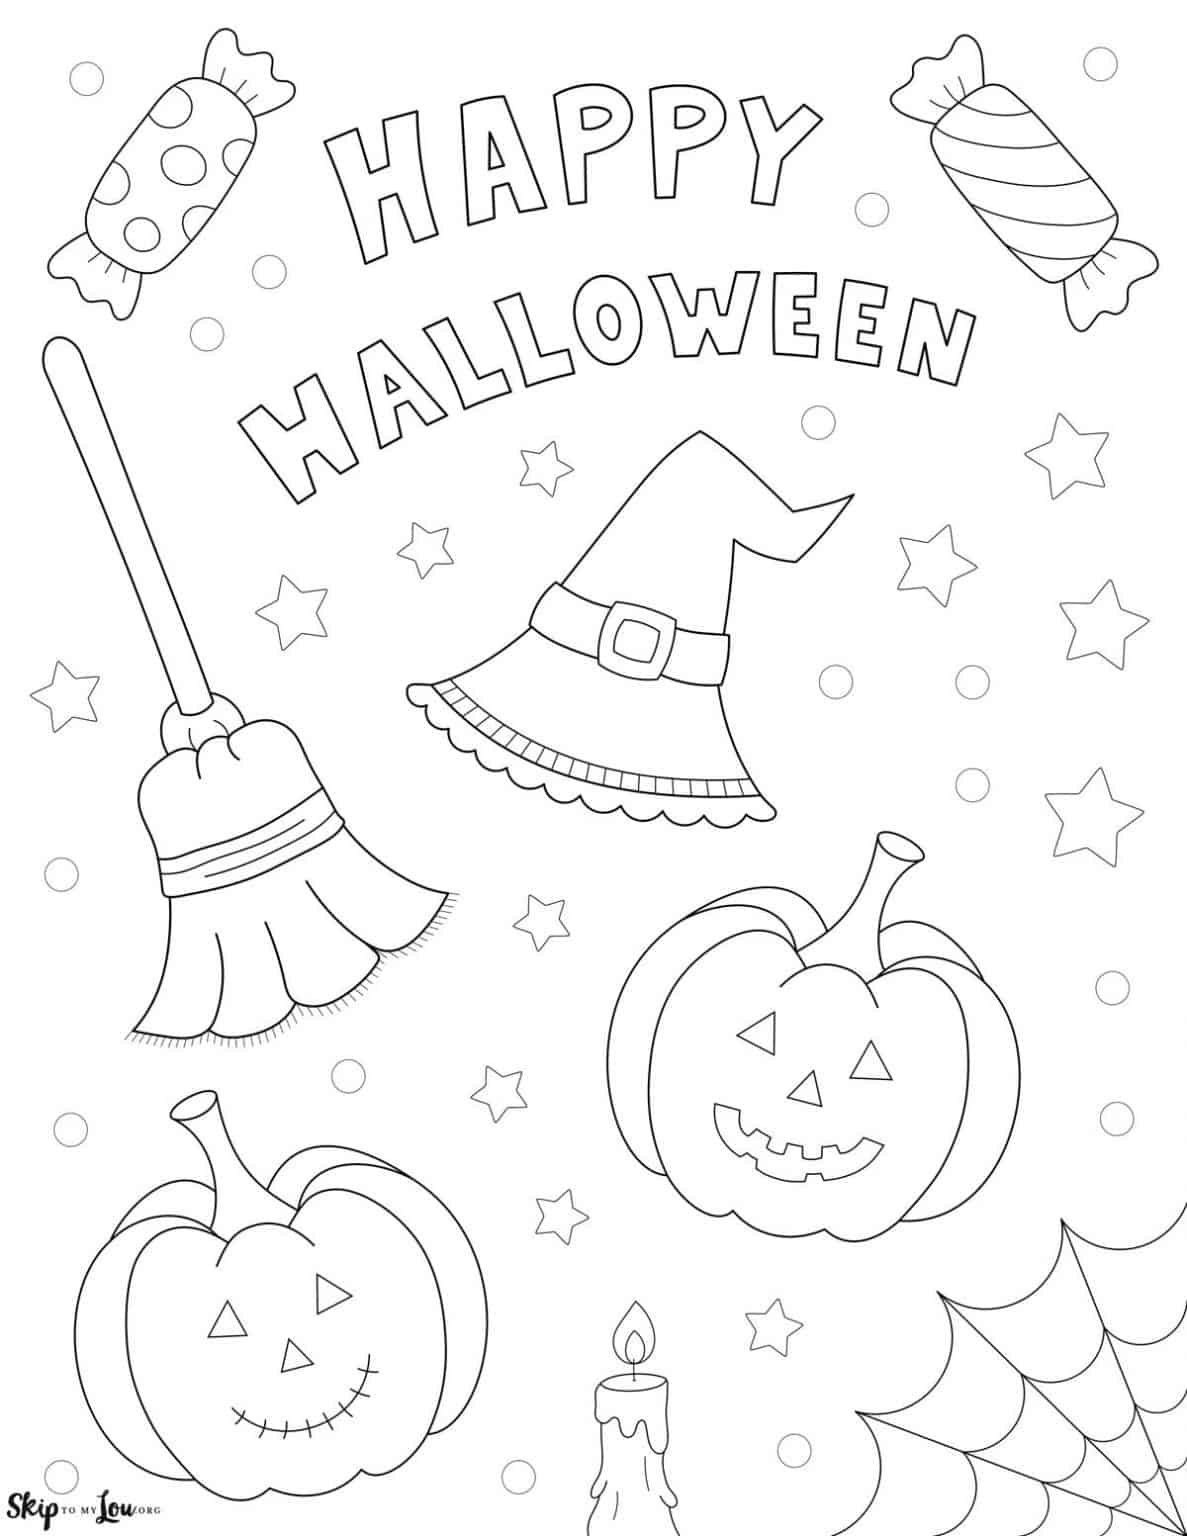 Cute Halloween Coloring Pages to print and color!